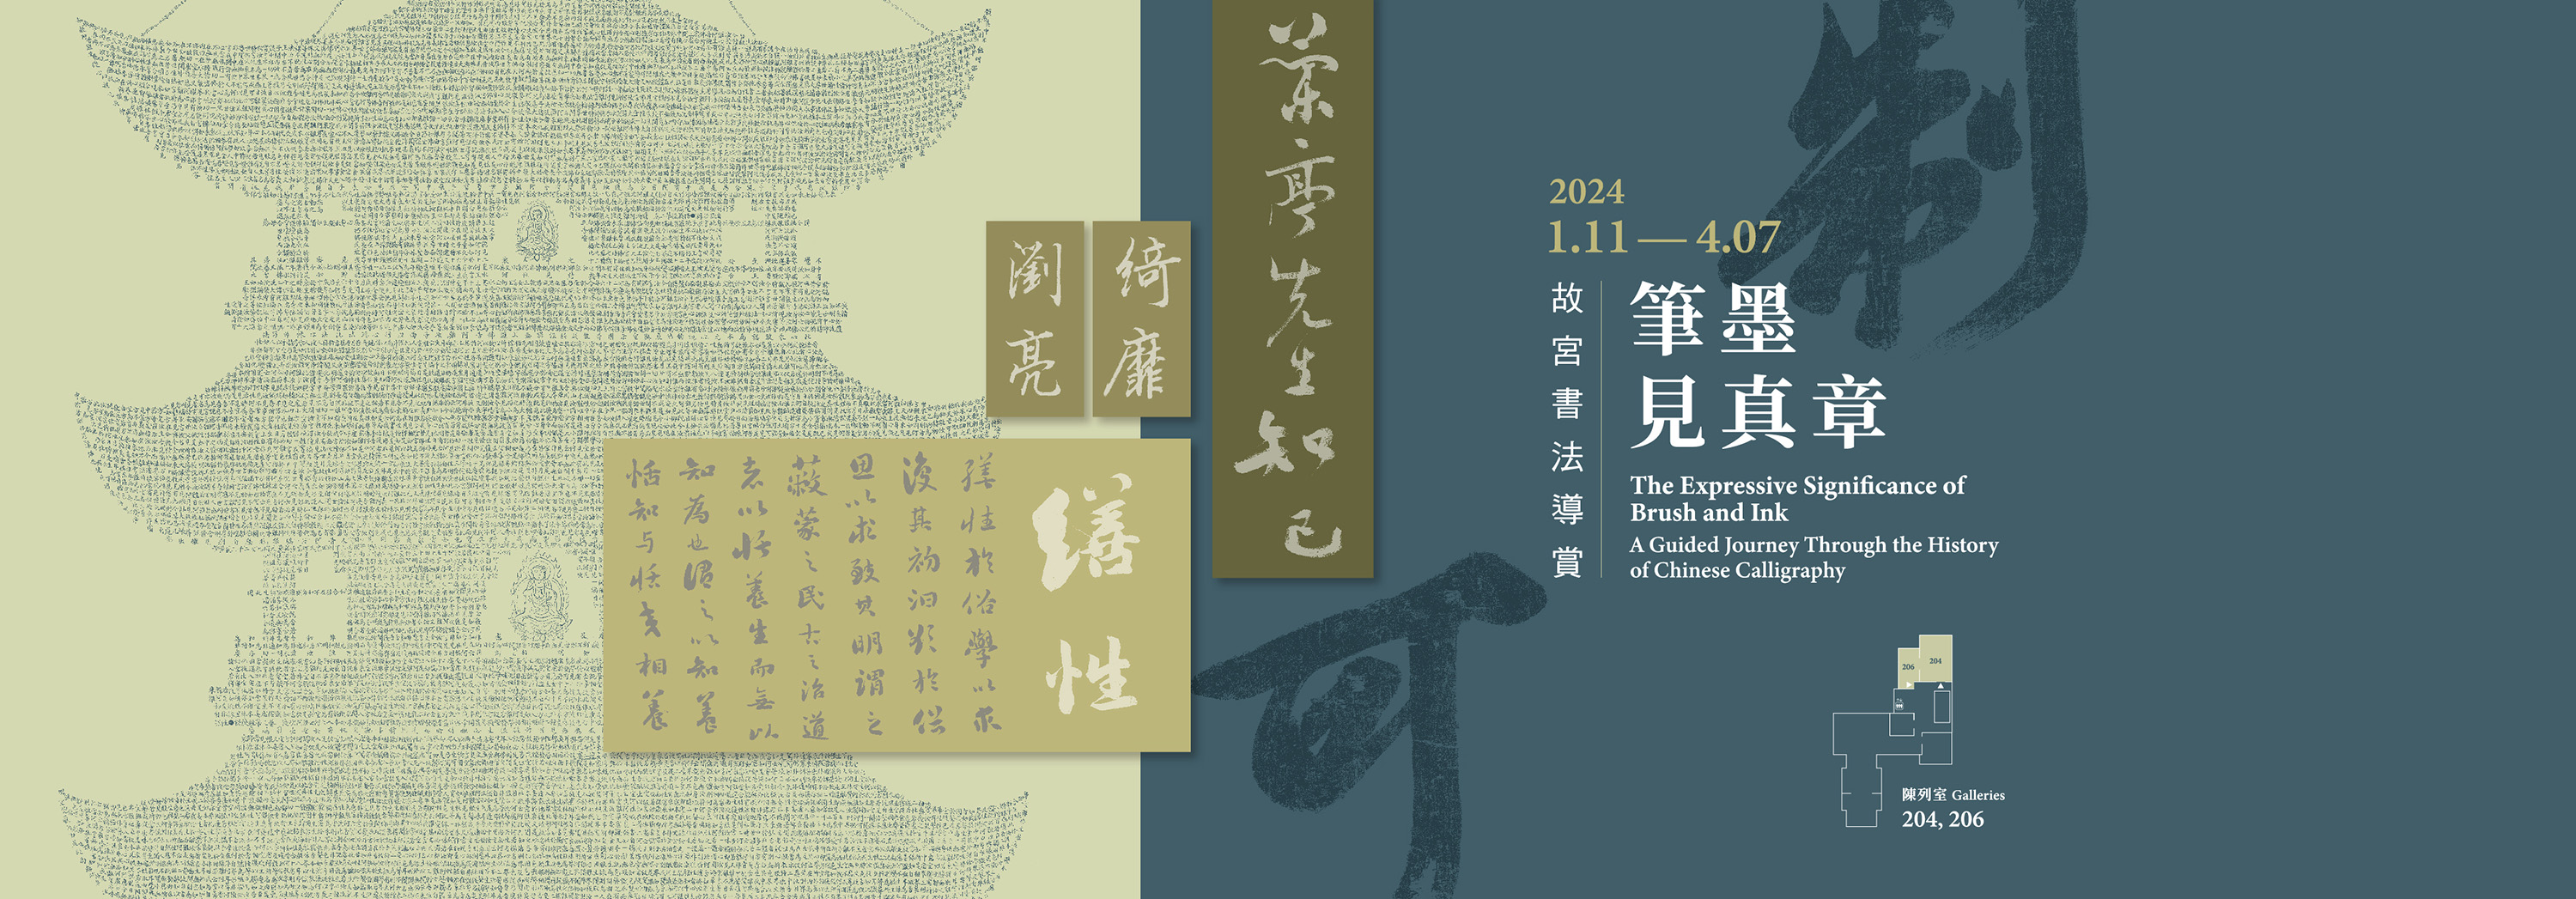 Revelatory Brushwork: A Guide to Calligraphy in the National Palace Museum Collection  (2024-I)